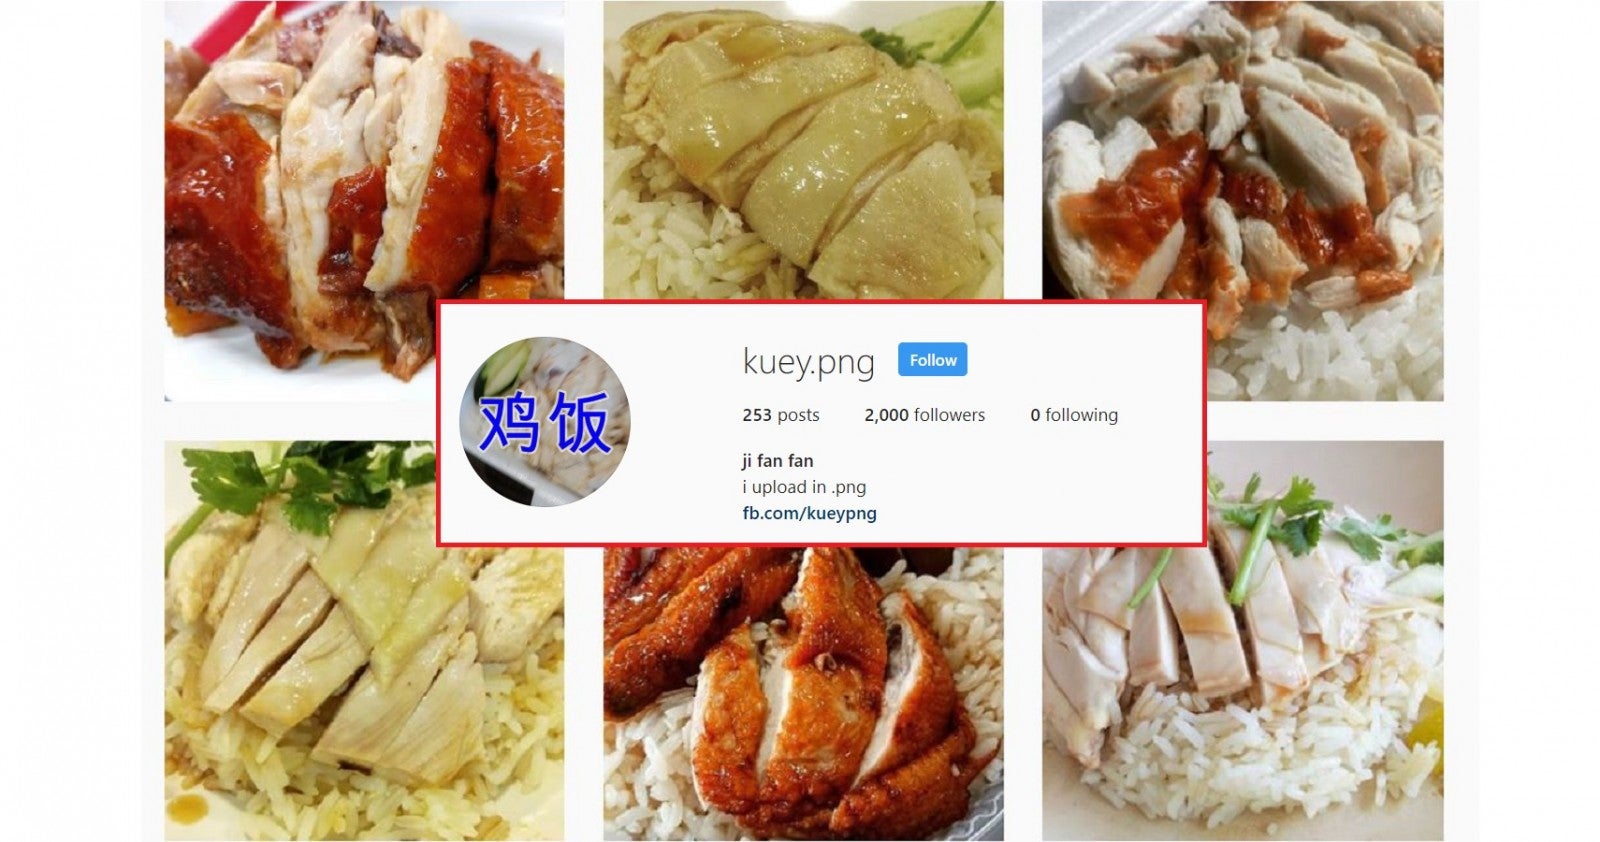 This Guy Loves Chicken Rice So Much, He Eats It Every Day & Posts It On Instagram - WORLD OF BUZZ 1